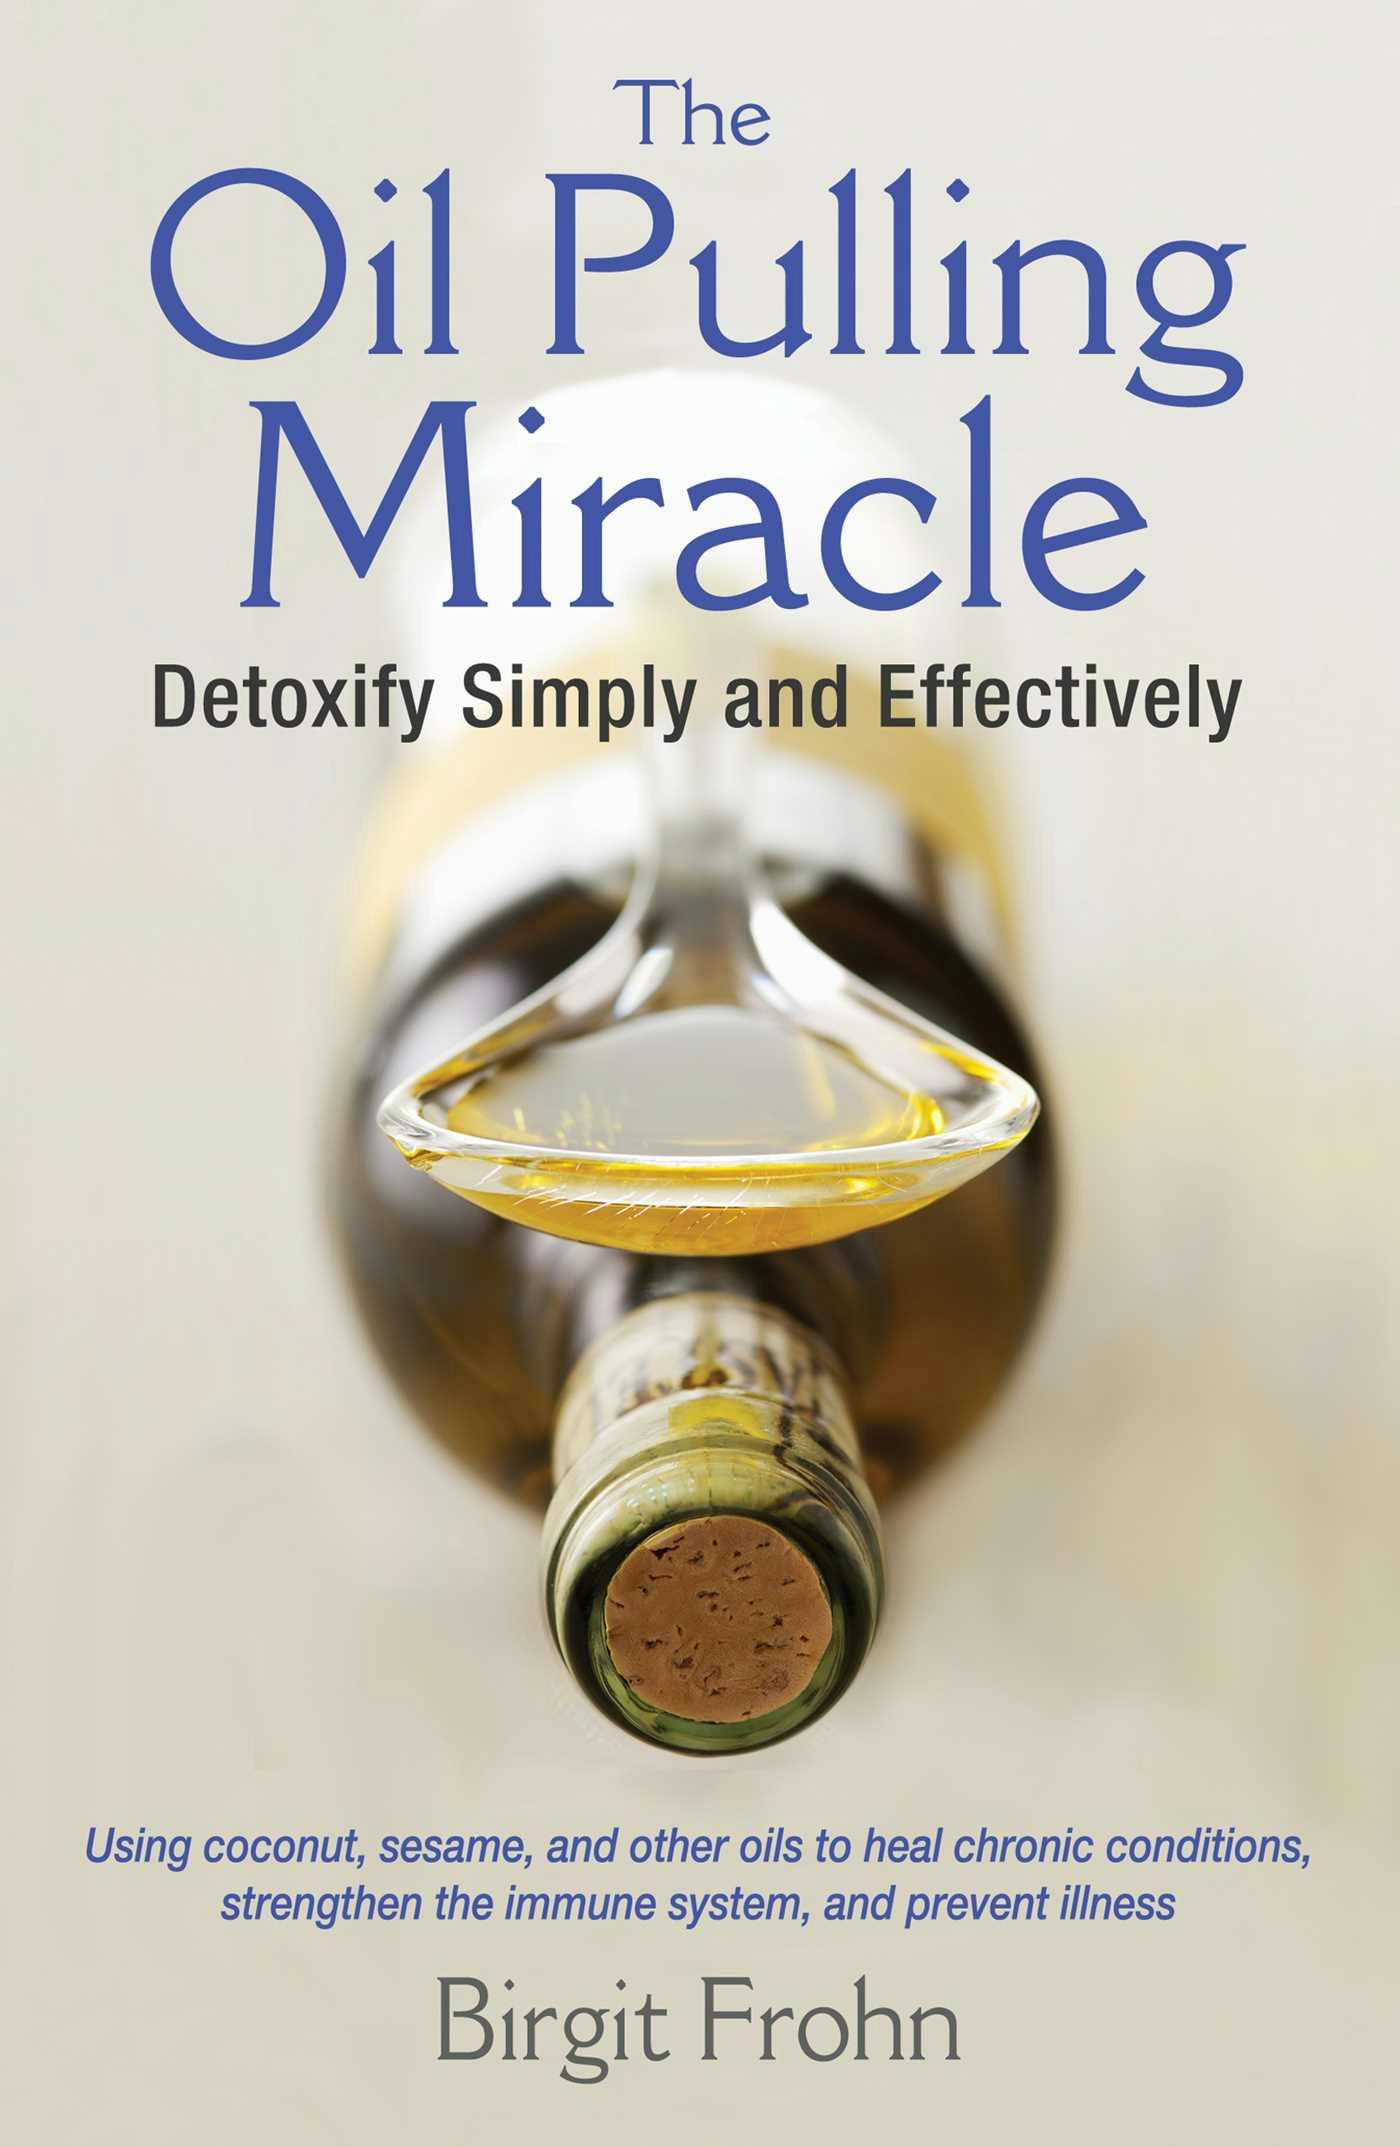 The Oil Pulling Miracle: Detoxify Simply and Effectively - Birgit Frohn